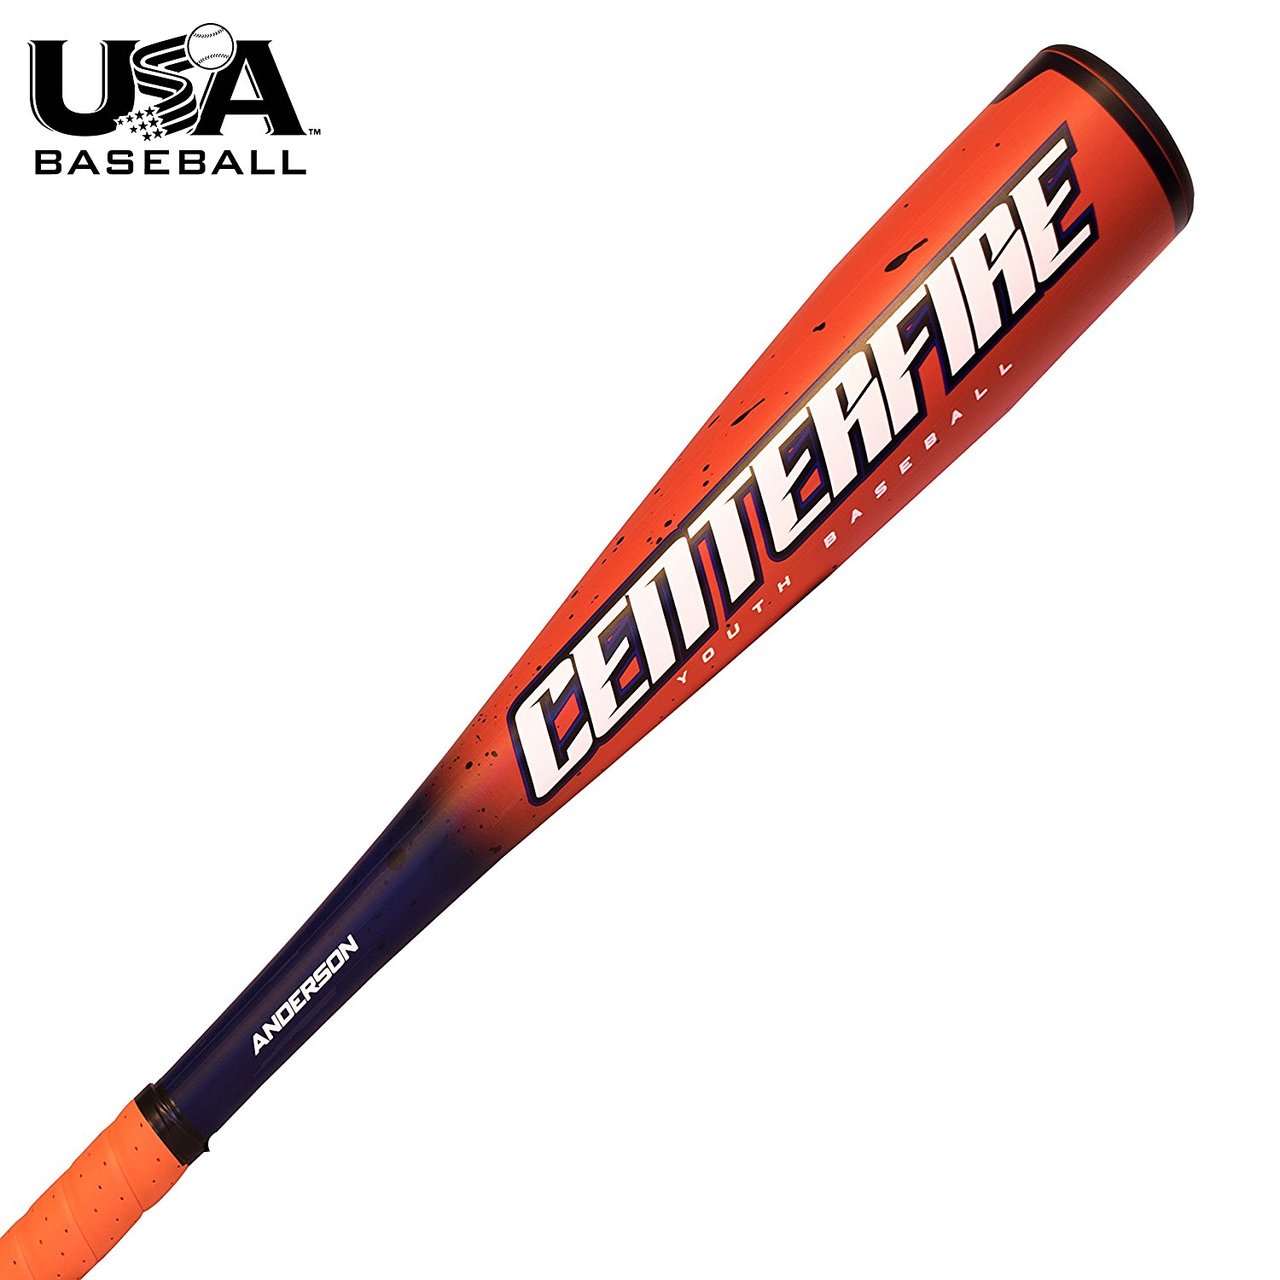 2 5/8” Barrel -11 Drop Weight Balanced swing weight for more speed and power Approved for USABat and most baseball associations including: Little League, Cal Ripken, Babe Ruth, Dixie Youth, AABC & Pony Manufacture Warranty: 1 year against manufacture defects The One-Piece Beast! The 2018 Anderson Centerfire -11 baseball bat is our latest addition to our youth baseball category. This high grade one piece design offers an ultra-balanced swing weight for improved bat speed for players looking to get through the hitting zone much faster. The high grade alloy barrel generates massive power thru out the barrel allowing you to center each hit on a baseball. No hype, just performance! Ideal for players ages 7-10 2 5/8” Barrel -11 Drop Weight Balanced swing weight for more speed and power Hot out of the wrapper, no “break-in” period necessary High grade one piece aerospace alloy design Approved for USABat and most baseball associations including: Little League, Cal Ripken, Babe Ruth, Dixie Youth, AABC & Pony Model #: 015033